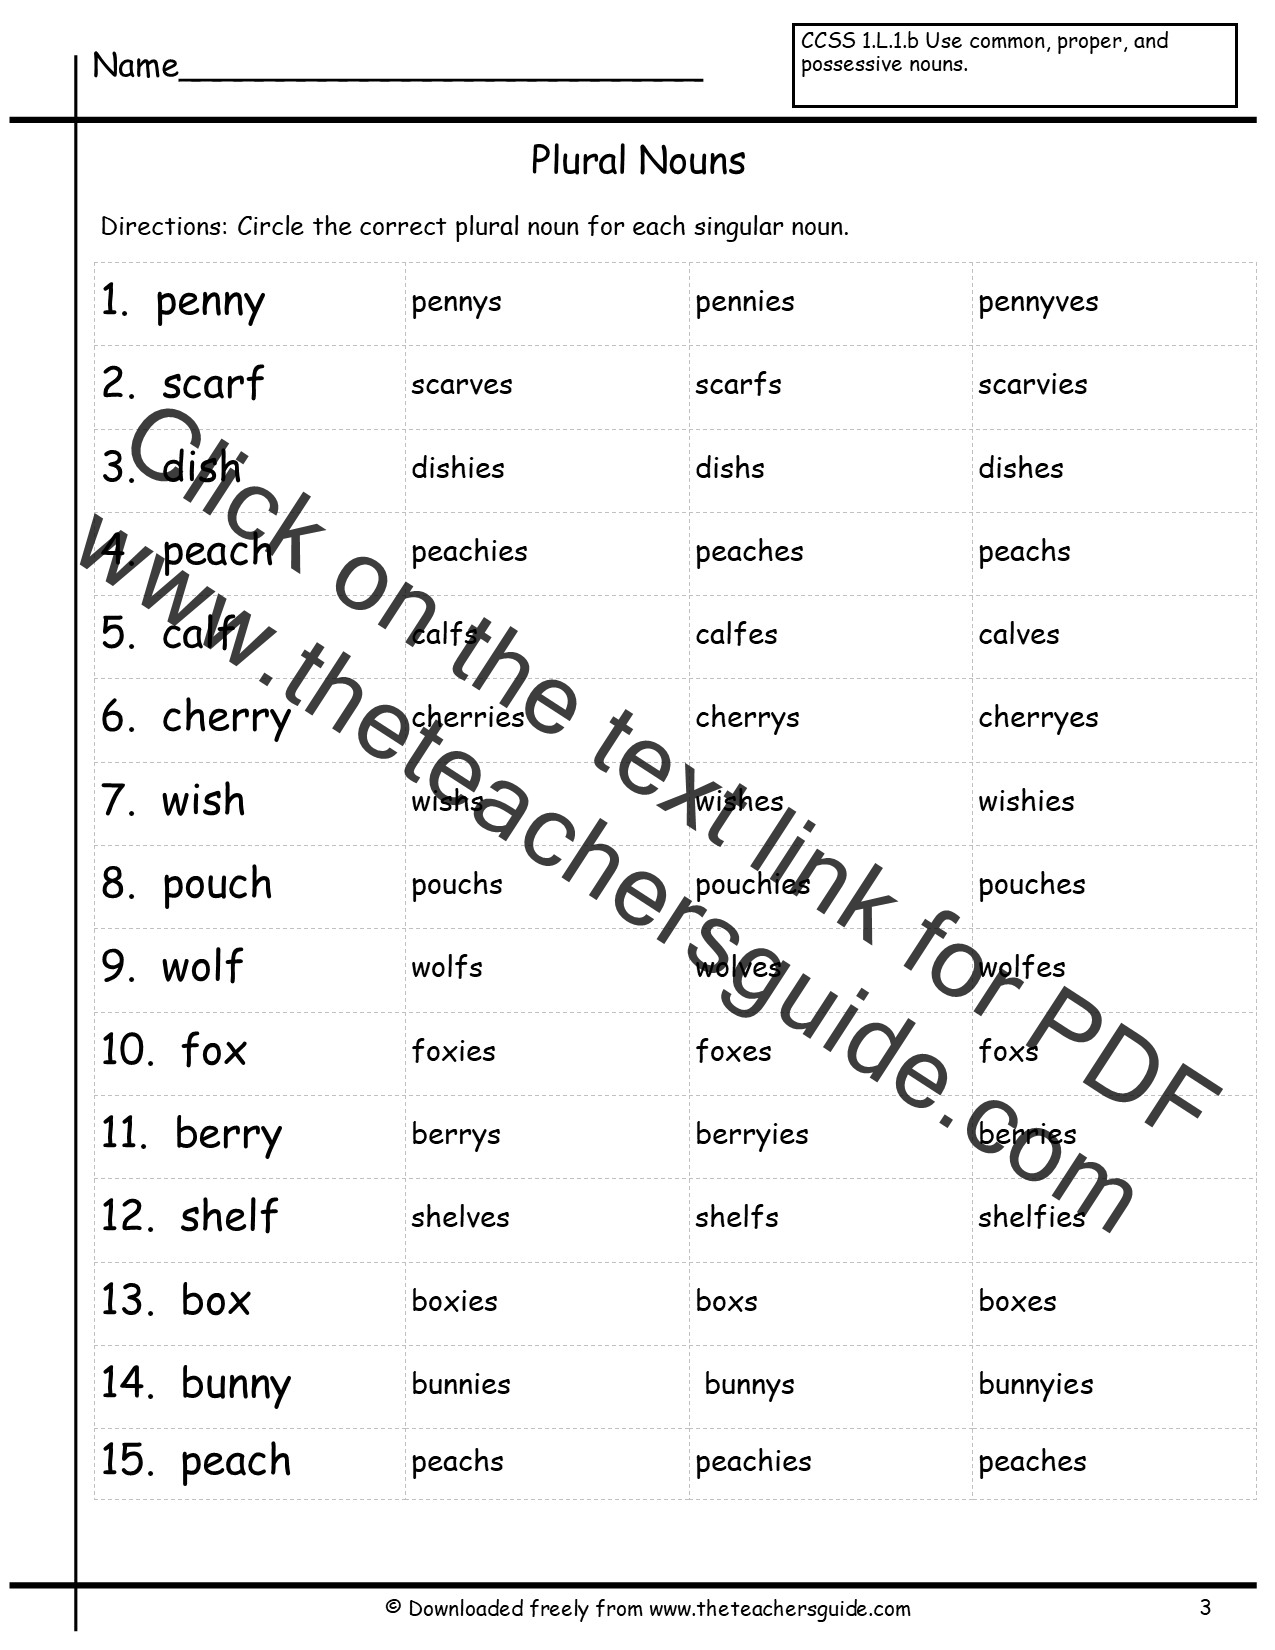 16-best-images-of-worksheets-adjectives-and-pronouns-demonstrative-pronouns-worksheet